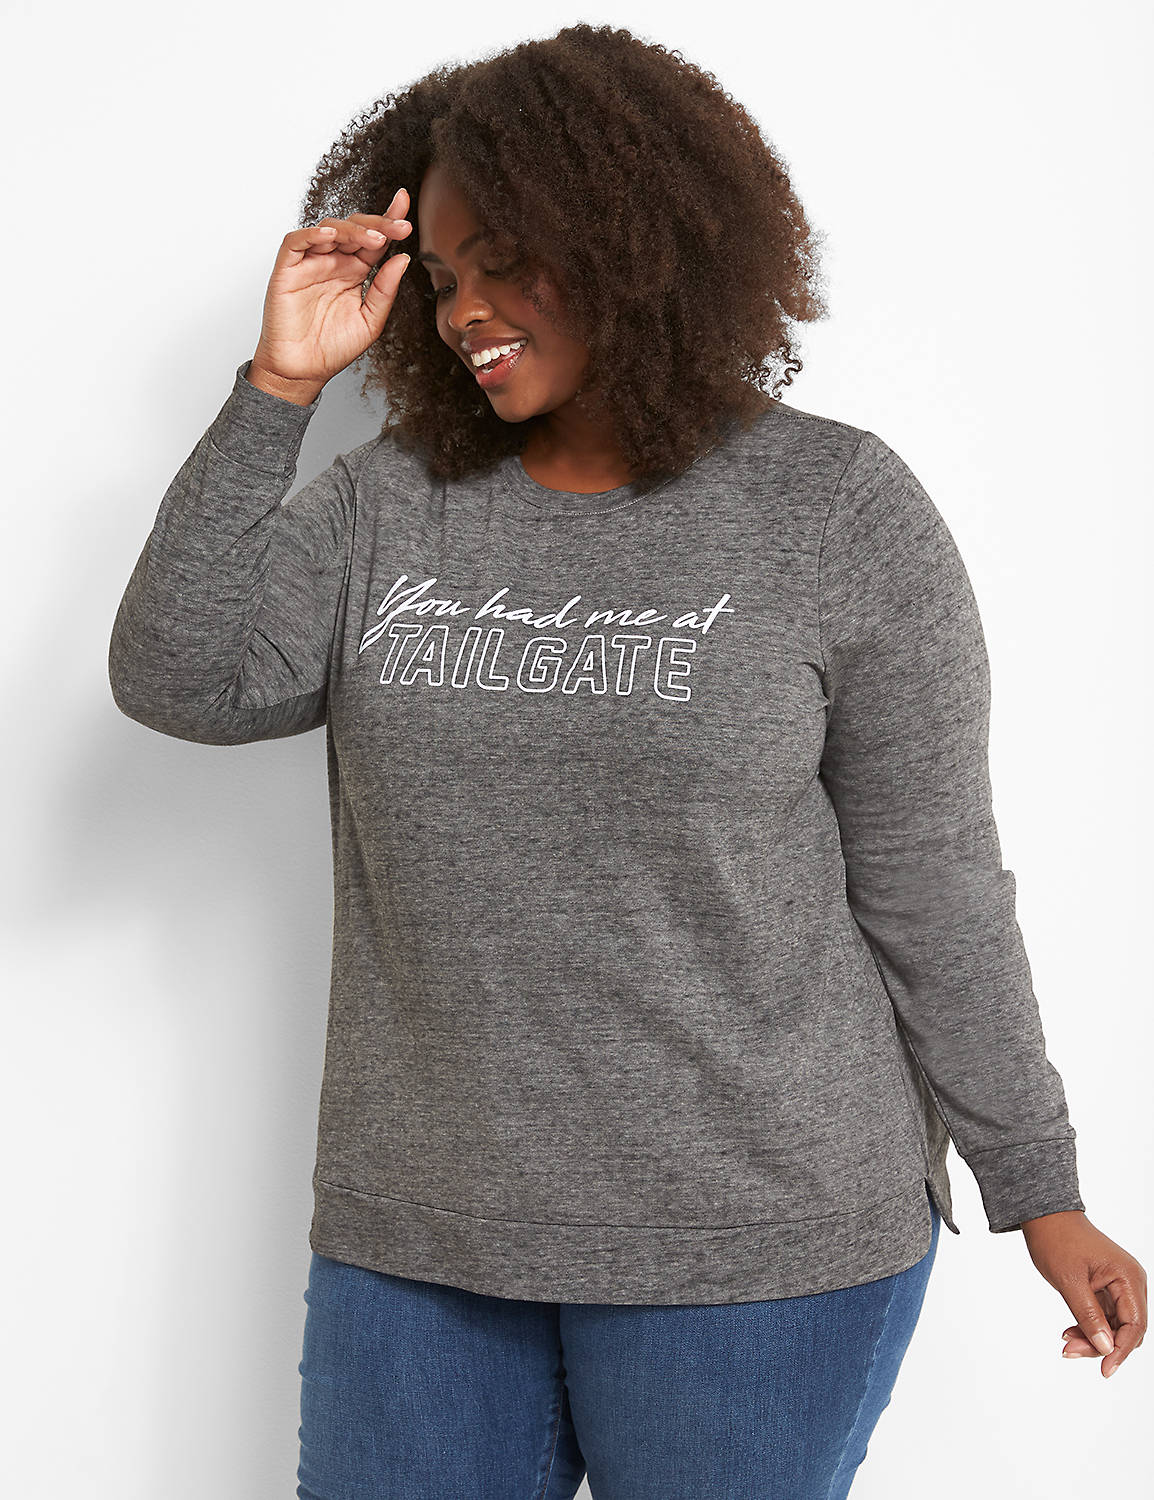 You Had Me At Tailgate Graphic Sweatshirt Product Image 1